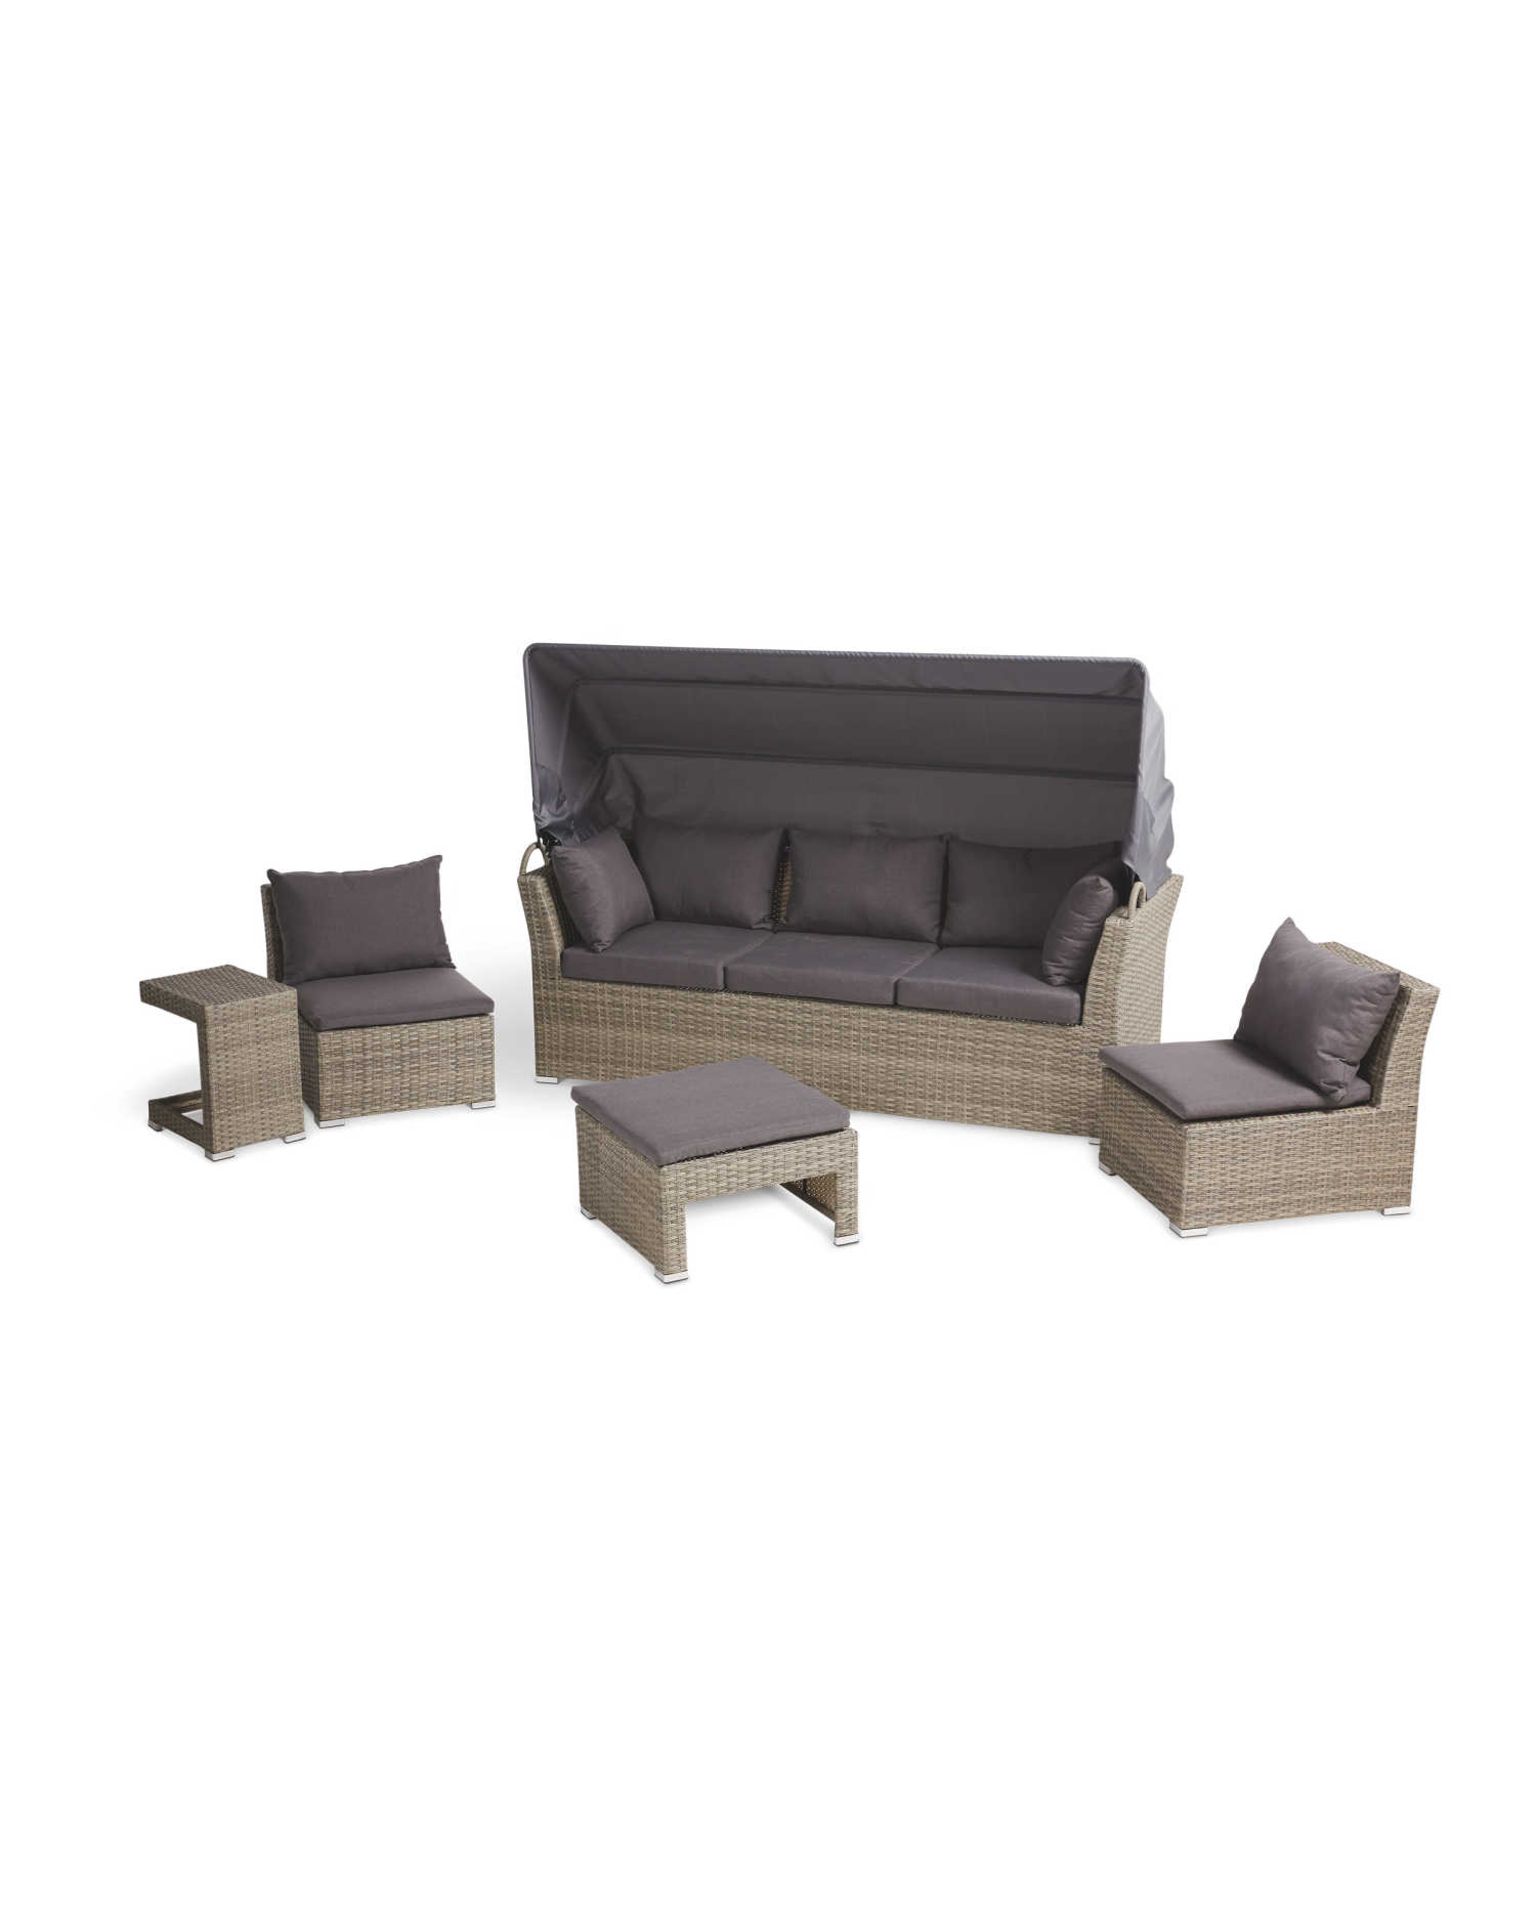 Rattan Effect Sofa Set with Canopy. - H/ST. Soak up the sun and feel that much needed summer - Image 2 of 2